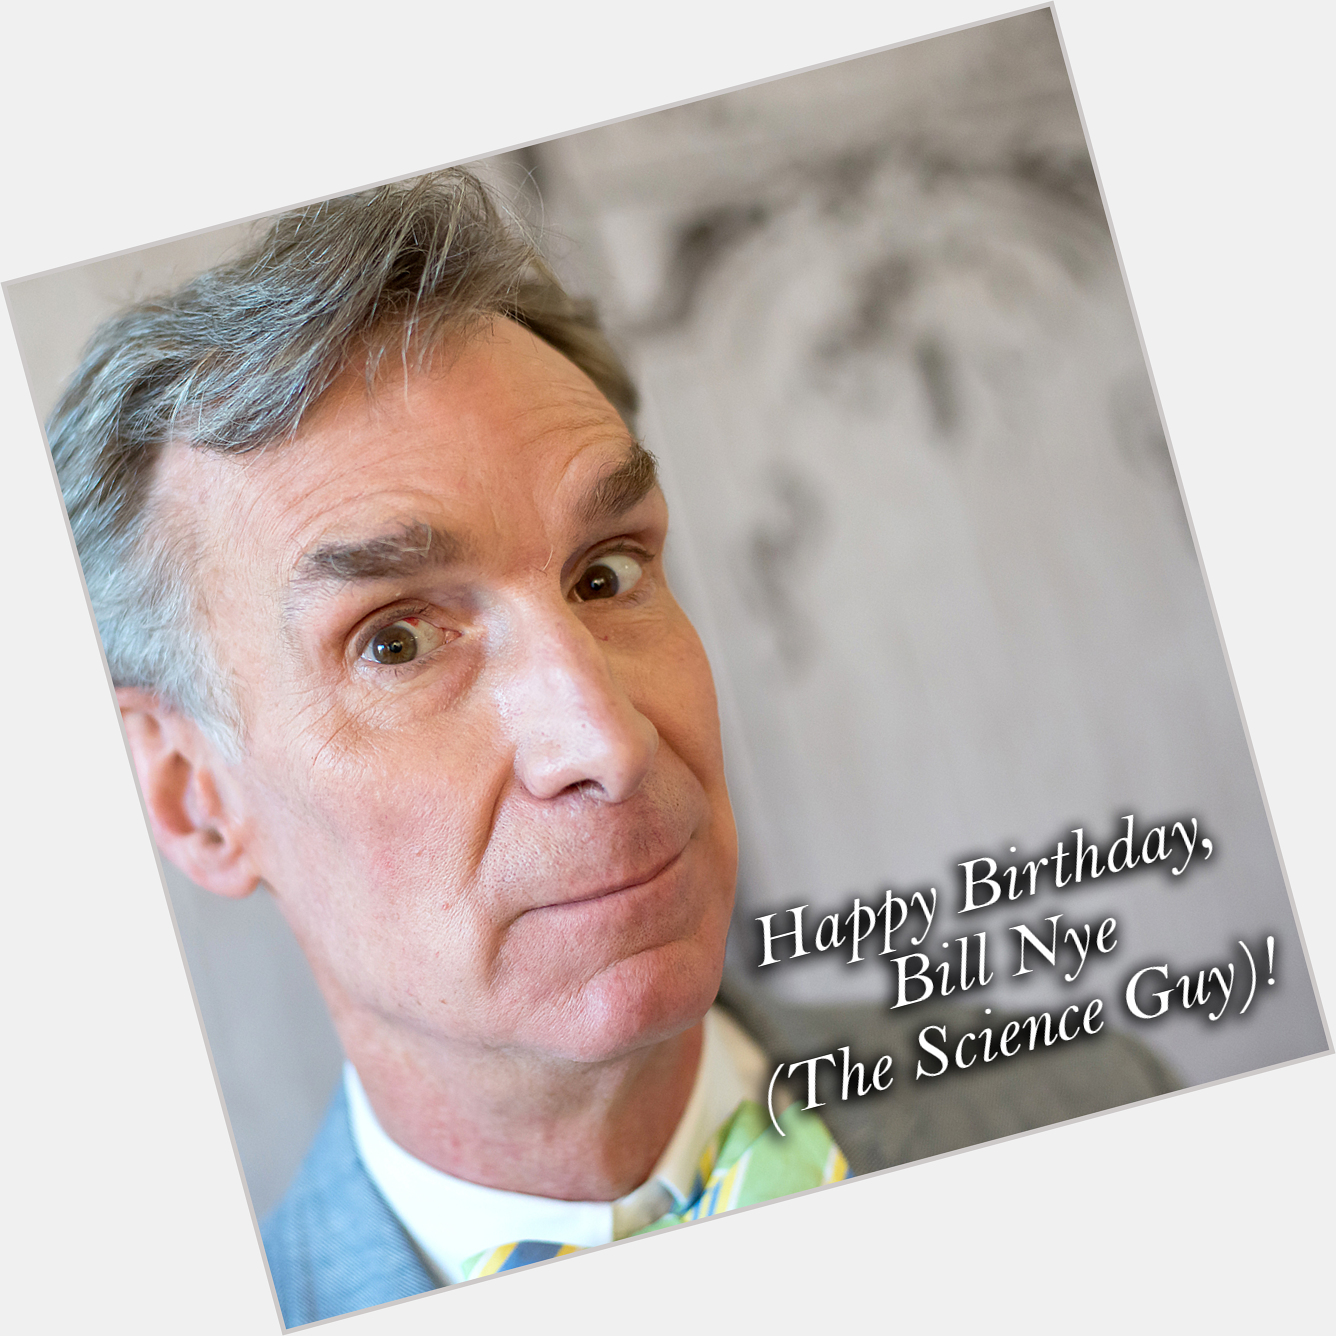 Happy Birthday, Bill Nye! He is 65 years old today! 